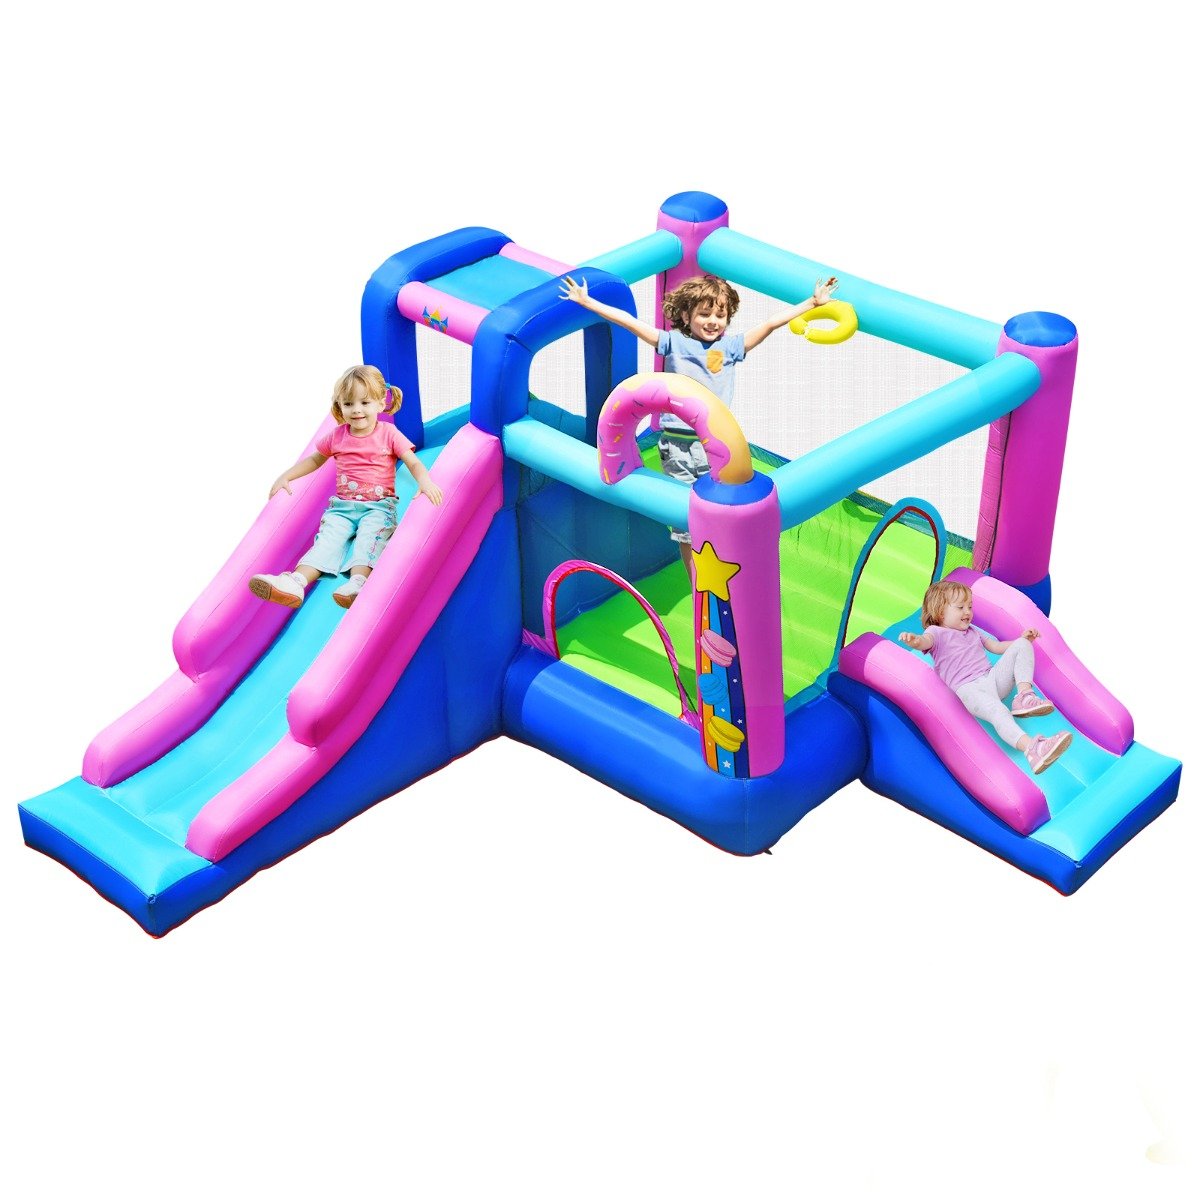 Double Slide Fun: Inflatable Bounce House with 2 Slides for Kids